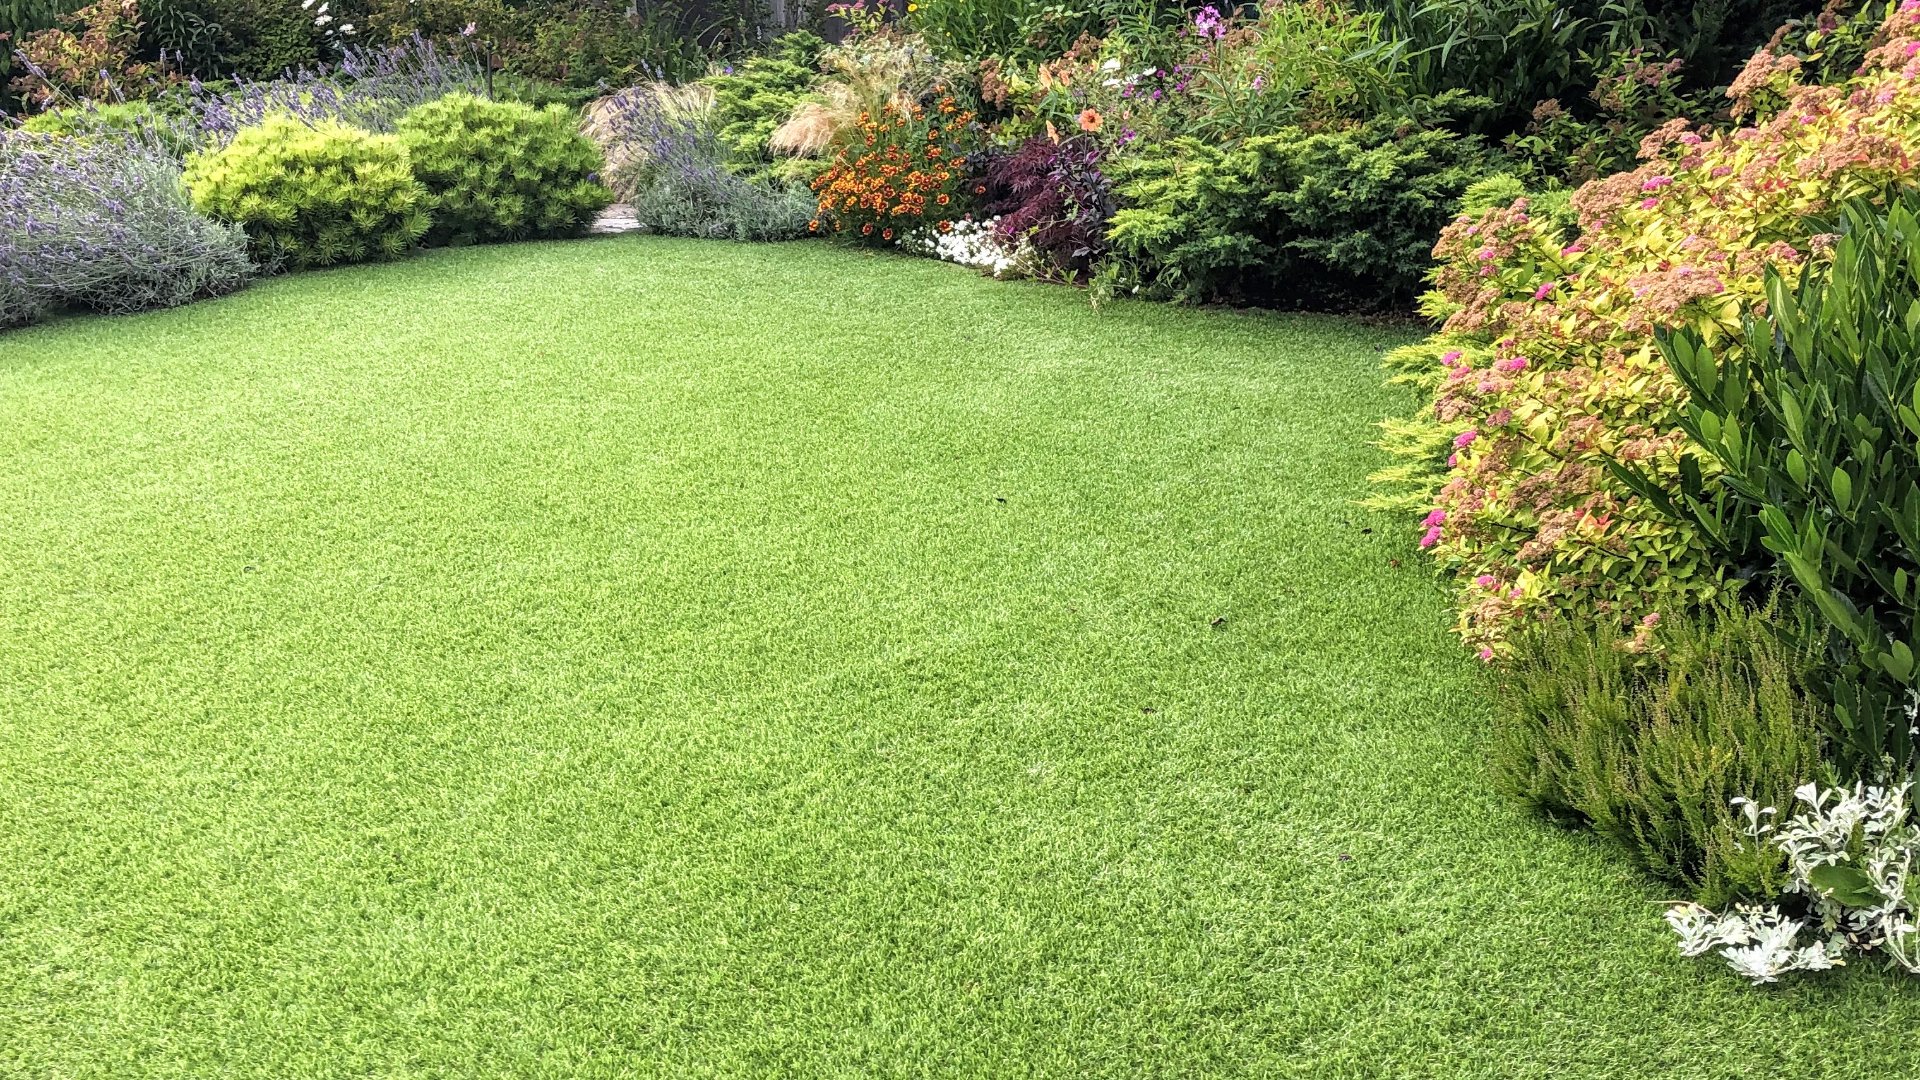 Should You Use Artificial Turf or Sod for Your New Lawn?